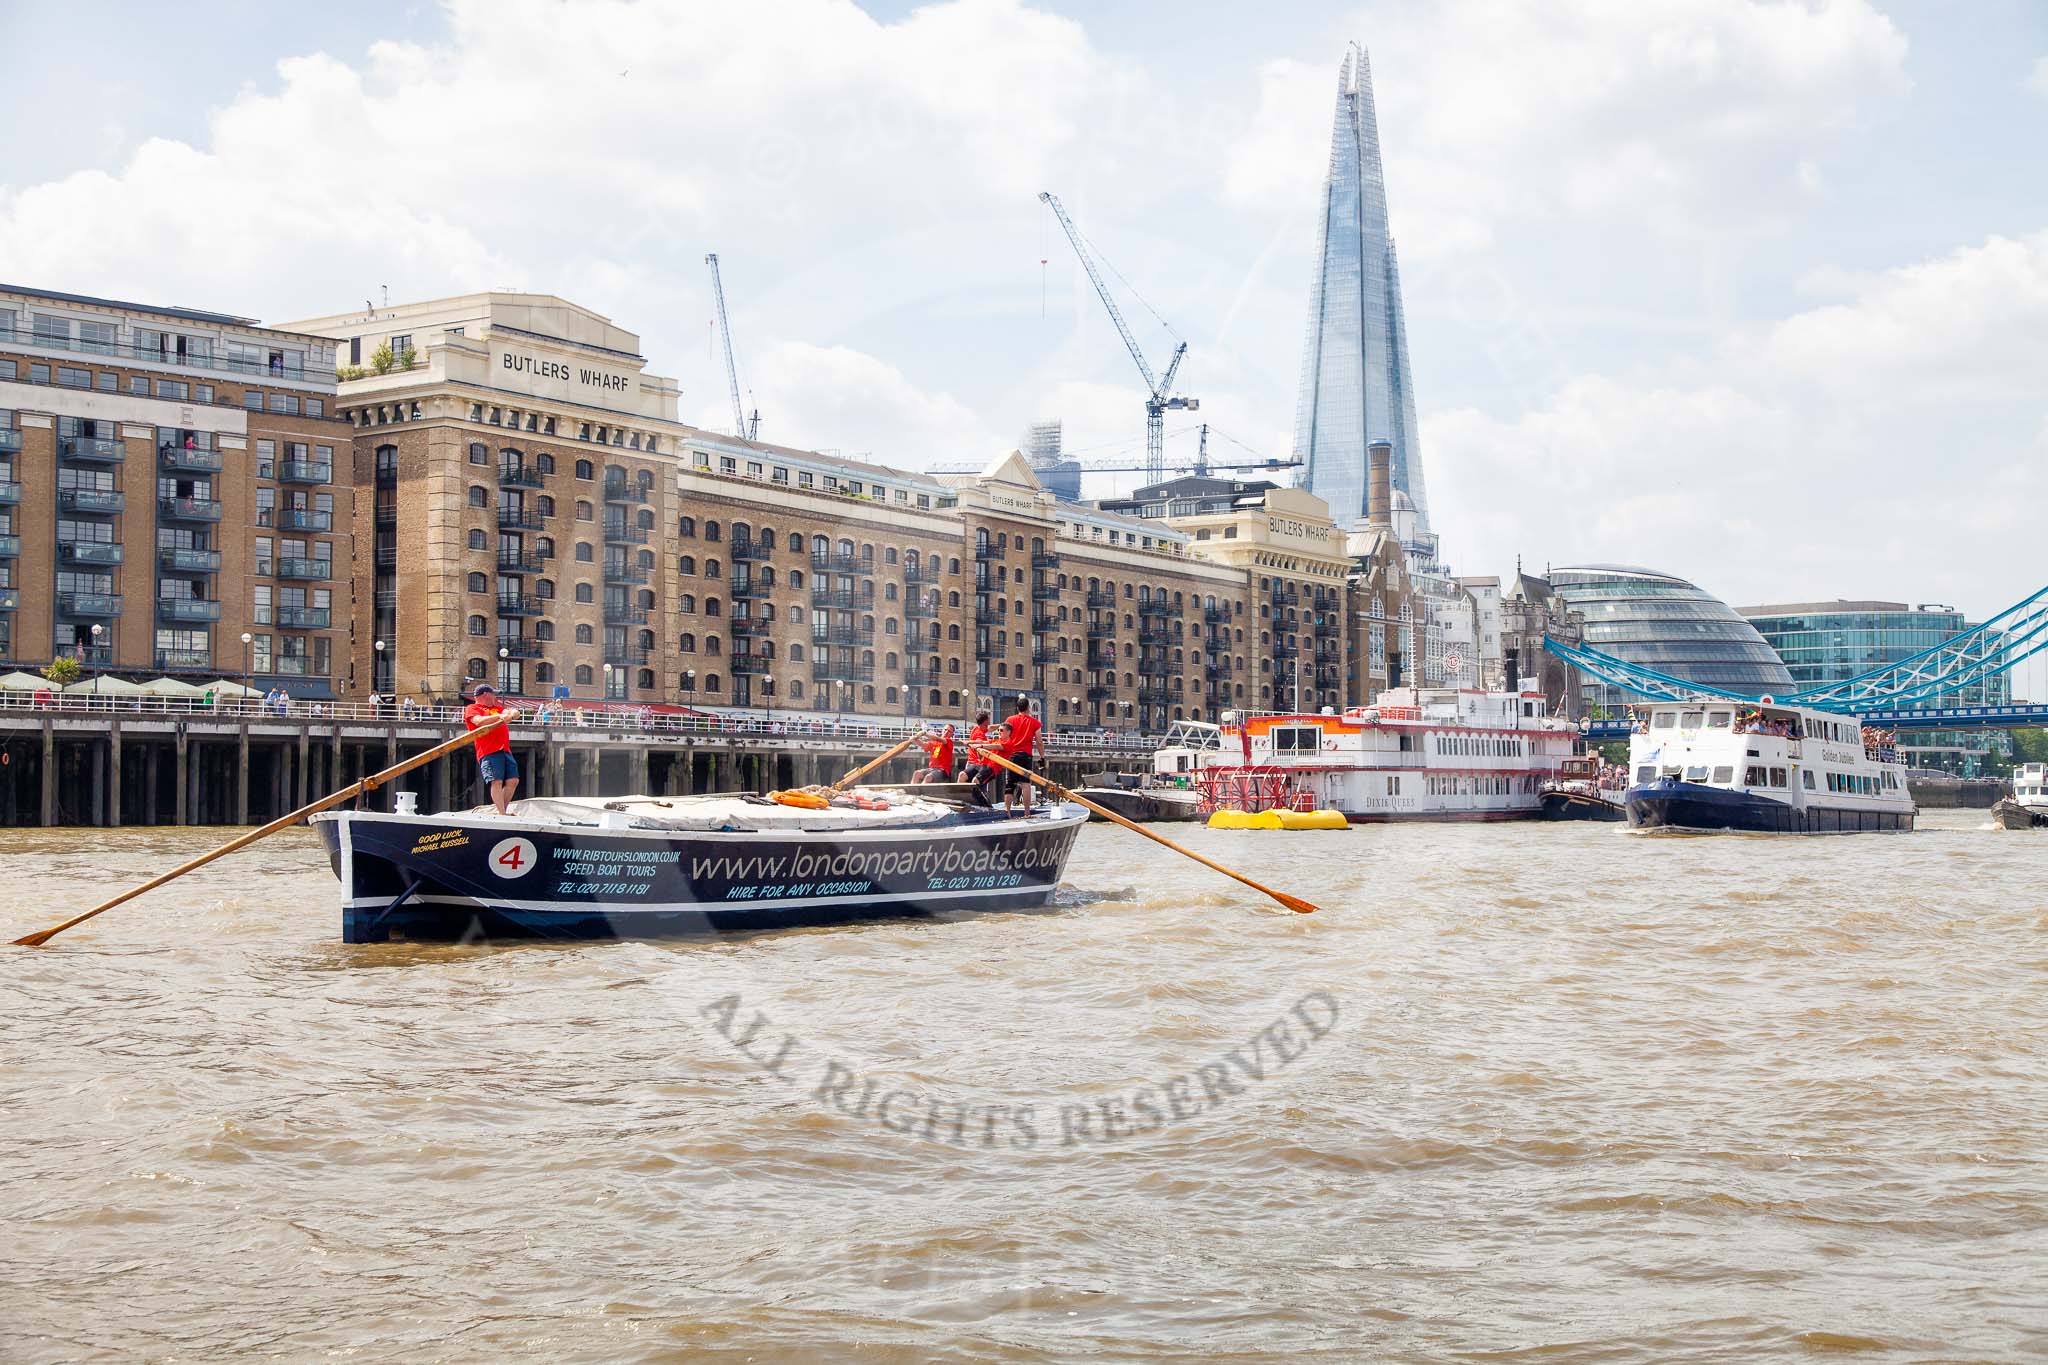 TOW River Thames Barge Driving Race 2013: Barge "Benjamin", by London Party Boats, in front of Butlers Wharf. On the right the Shard building, City Hall, and Tower Bridge..
River Thames between Greenwich and Westminster,
London,

United Kingdom,
on 13 July 2013 at 13:43, image #383